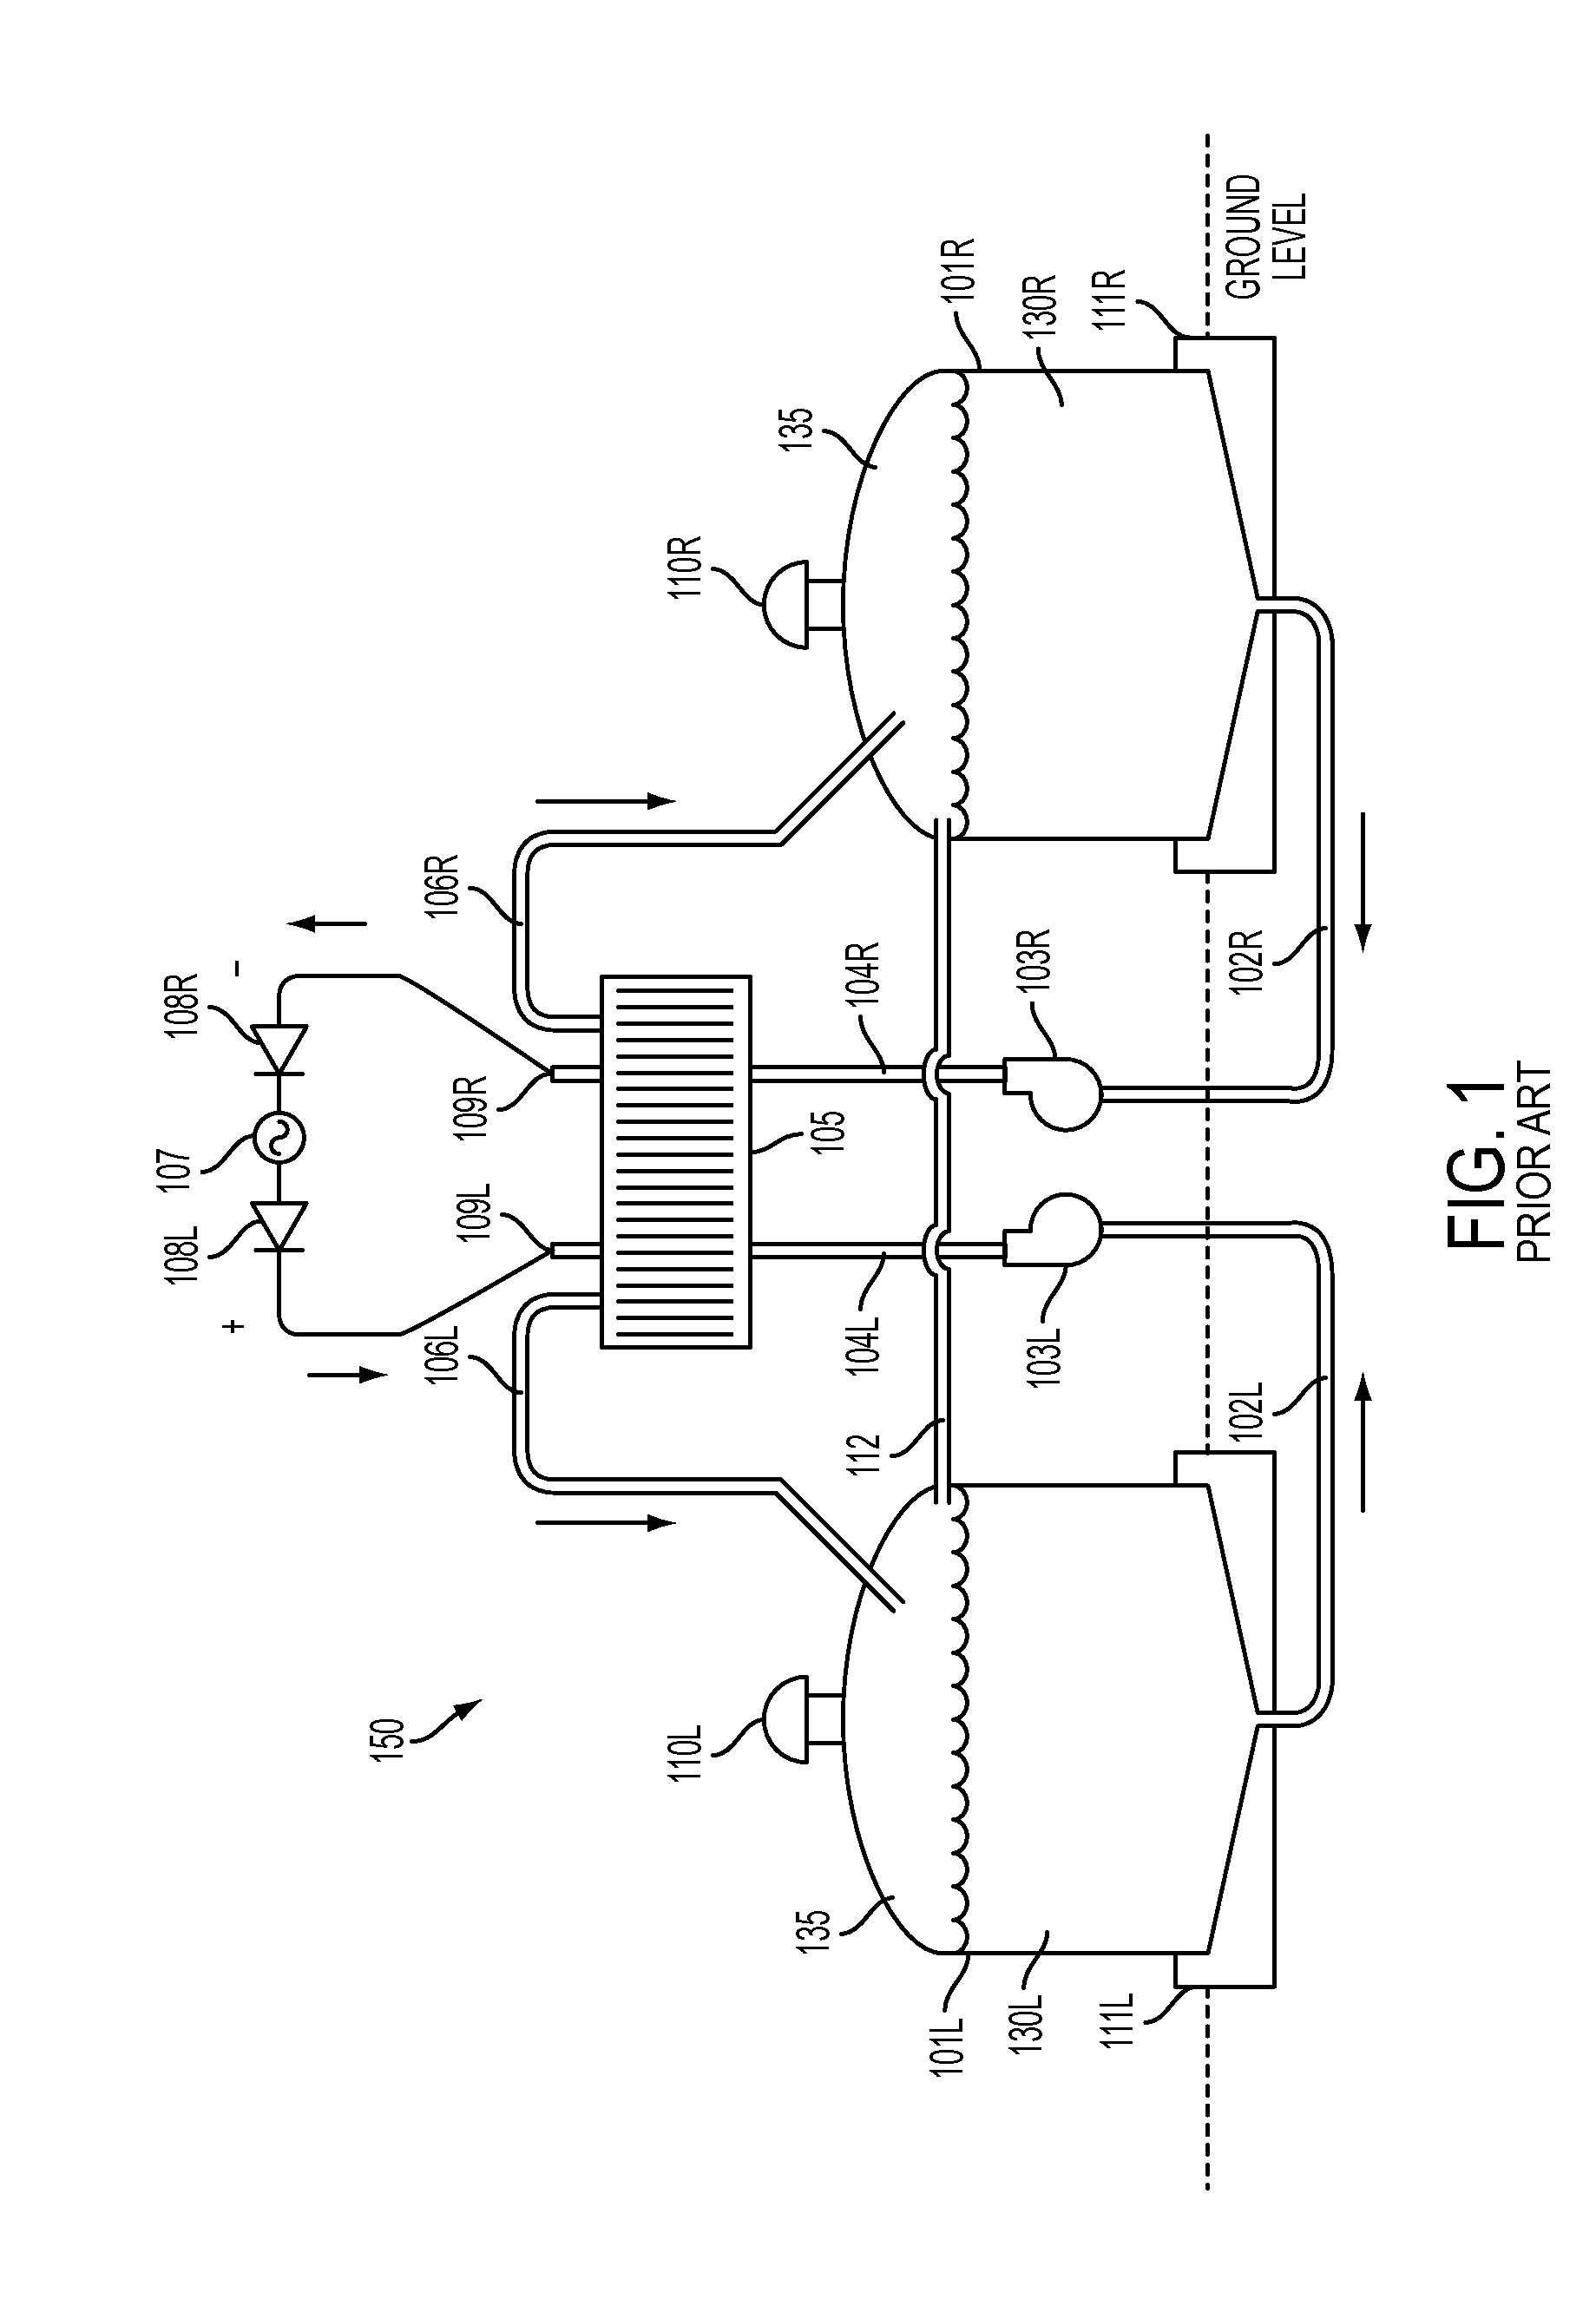 Polarity switching flow battery system and method